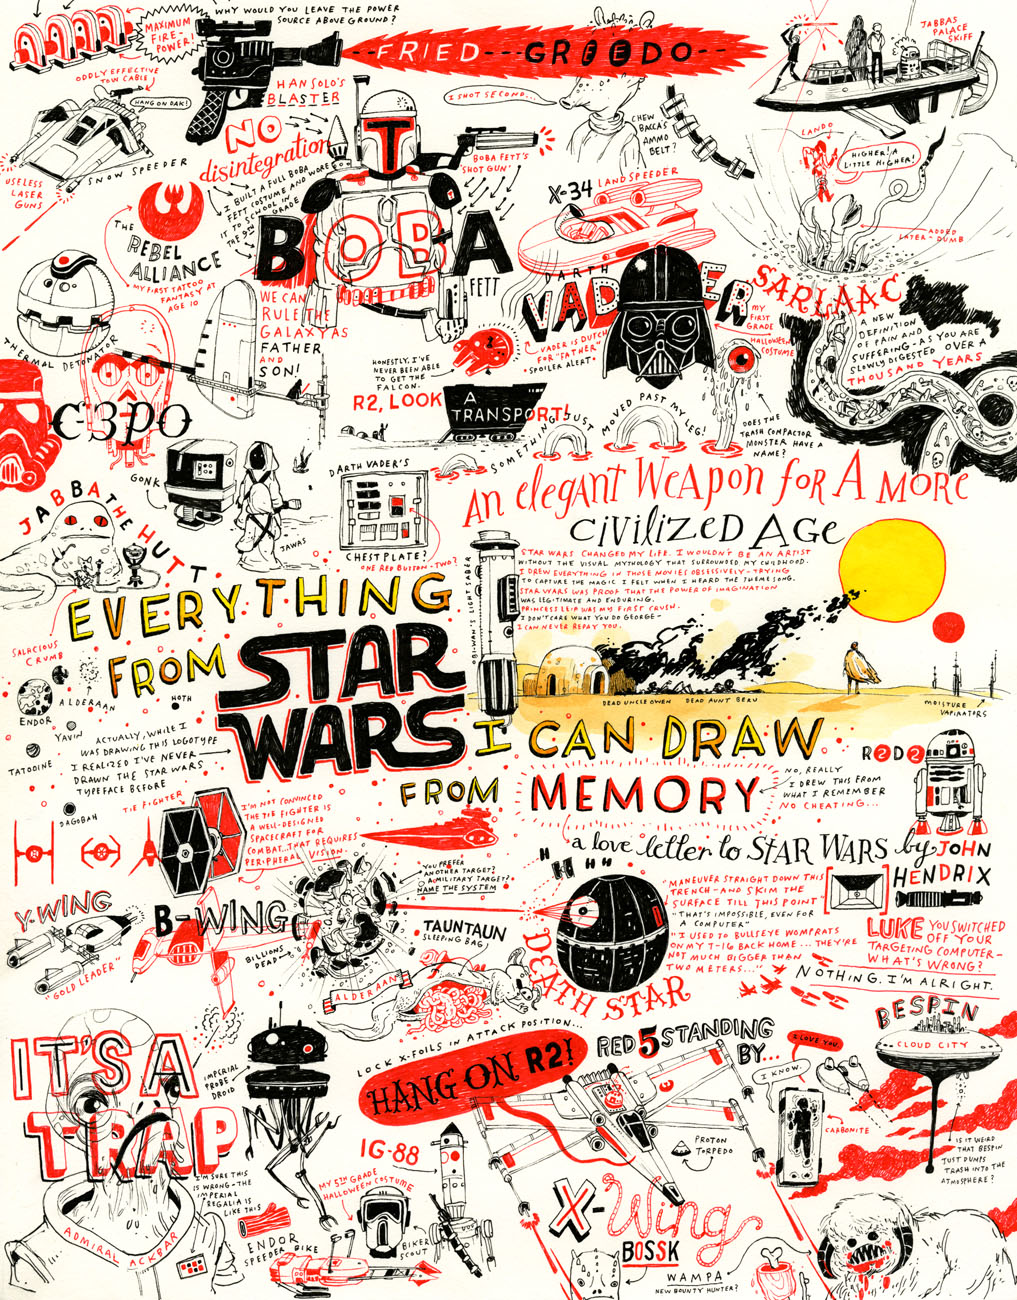 This Entire Awesome Star Wars Poster Was Illustrated From Memory